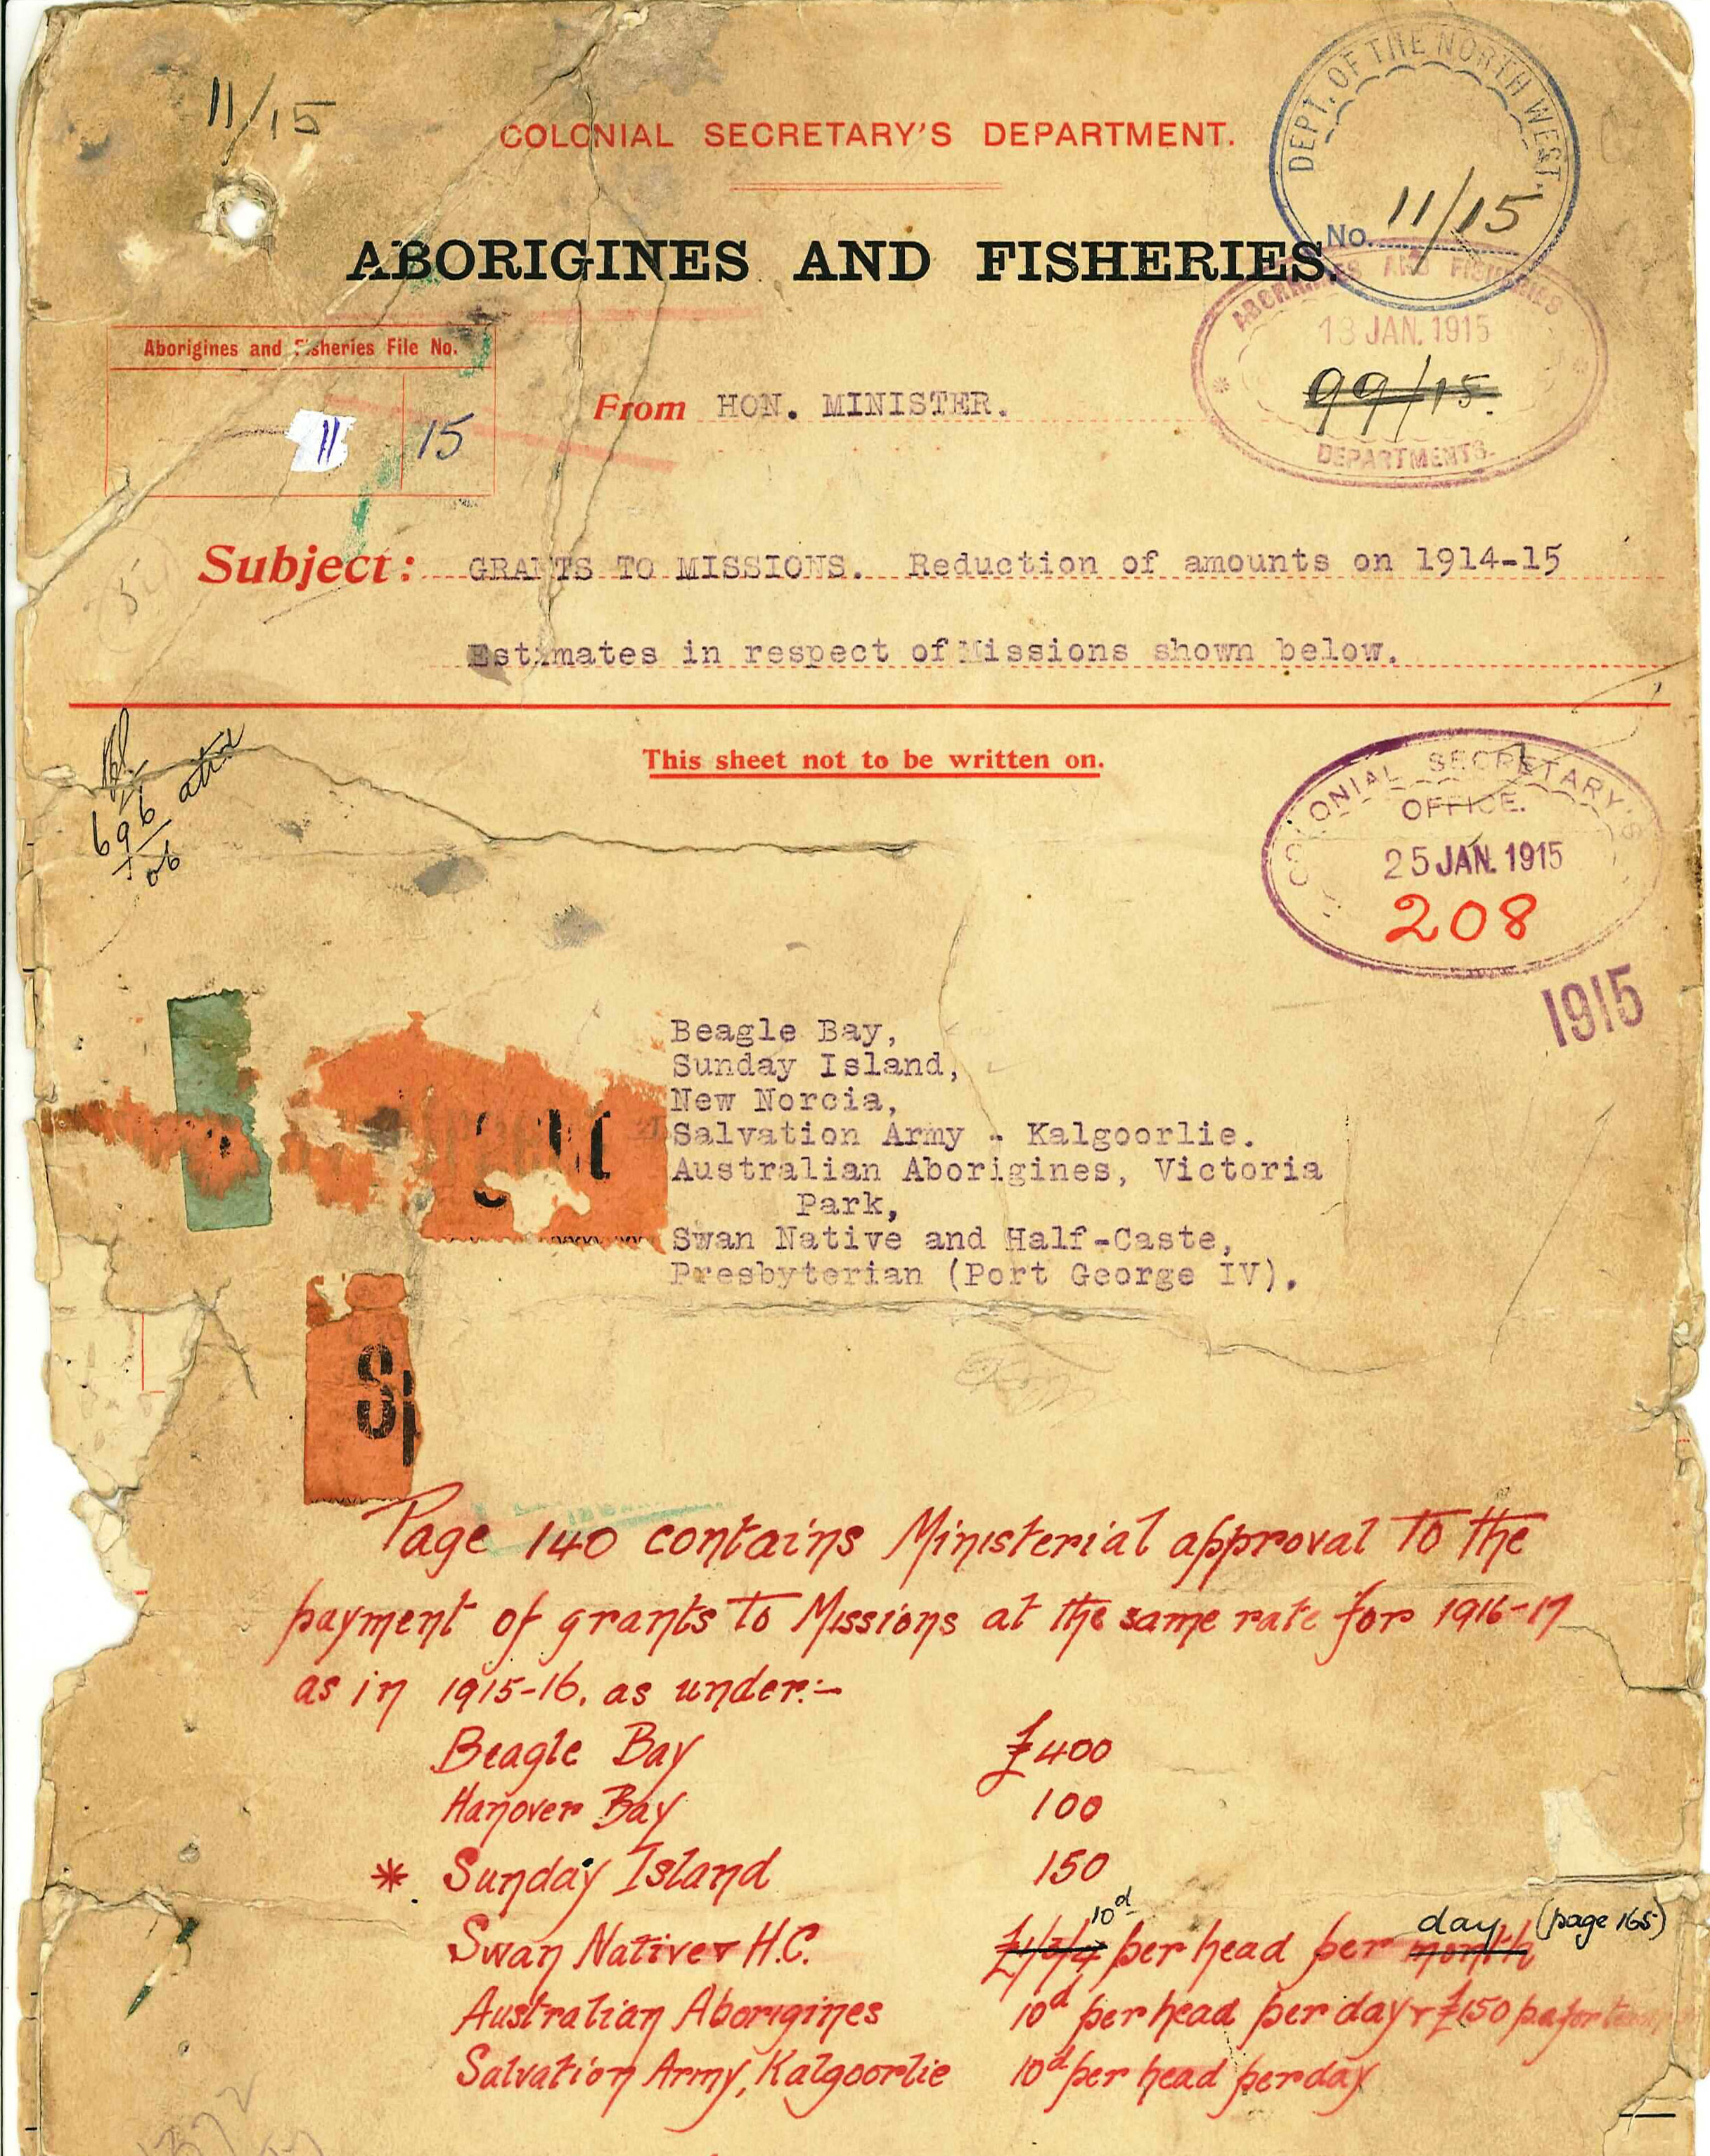 Torn and discoloured historical record title 'Colonial Secretary's Department - Aborigines and Fisheries. Dated 1915.